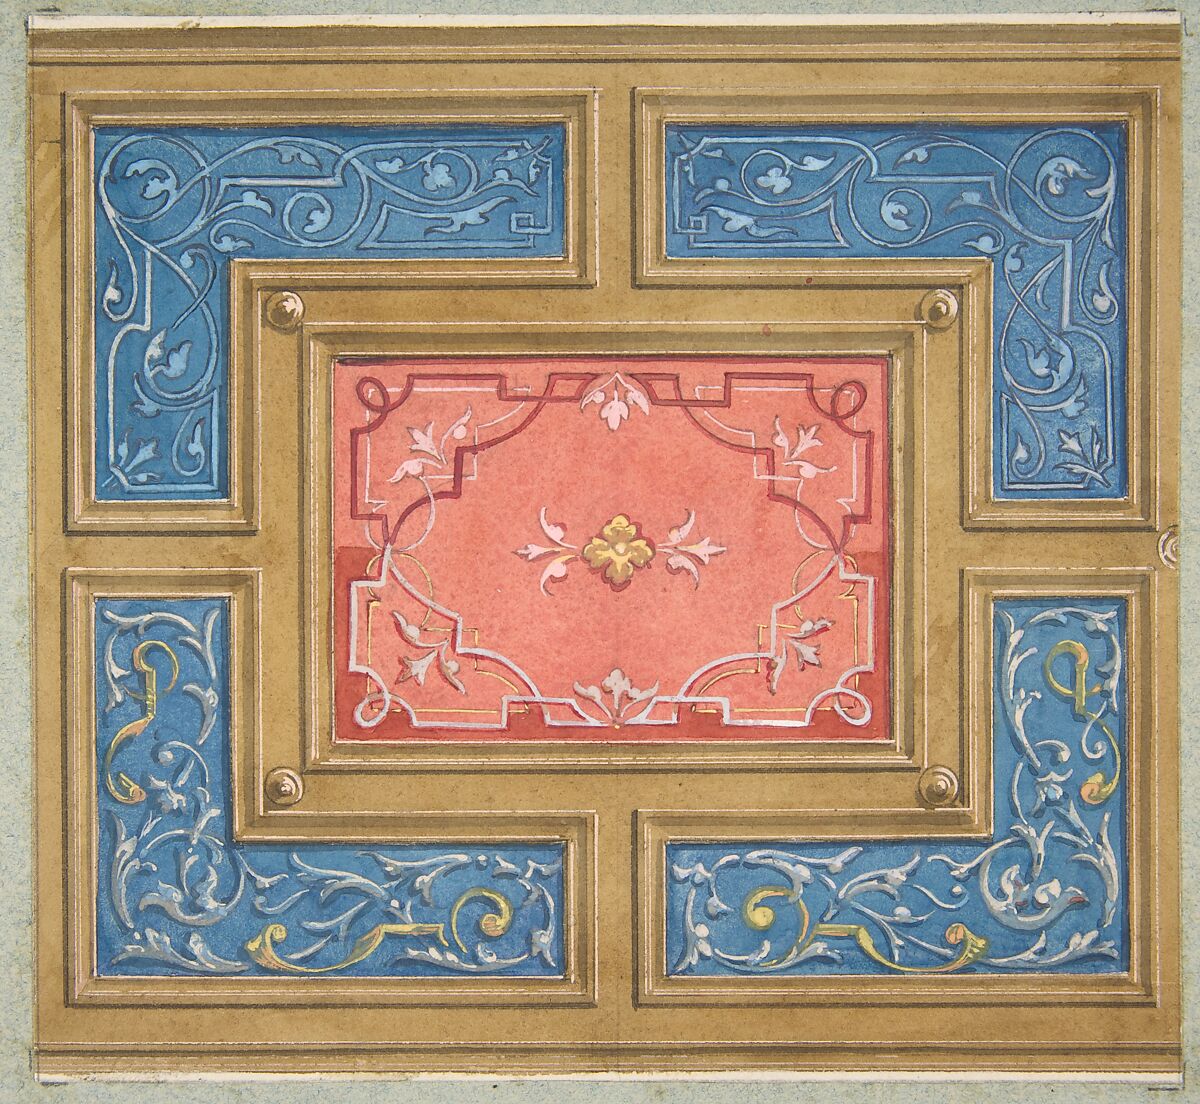 Design for a coffered ceiling with painted panels, Jules-Edmond-Charles Lachaise (French, died 1897), Pen and ink, watercolor, and gouache on wove paper; inlaid in blue wove paper 